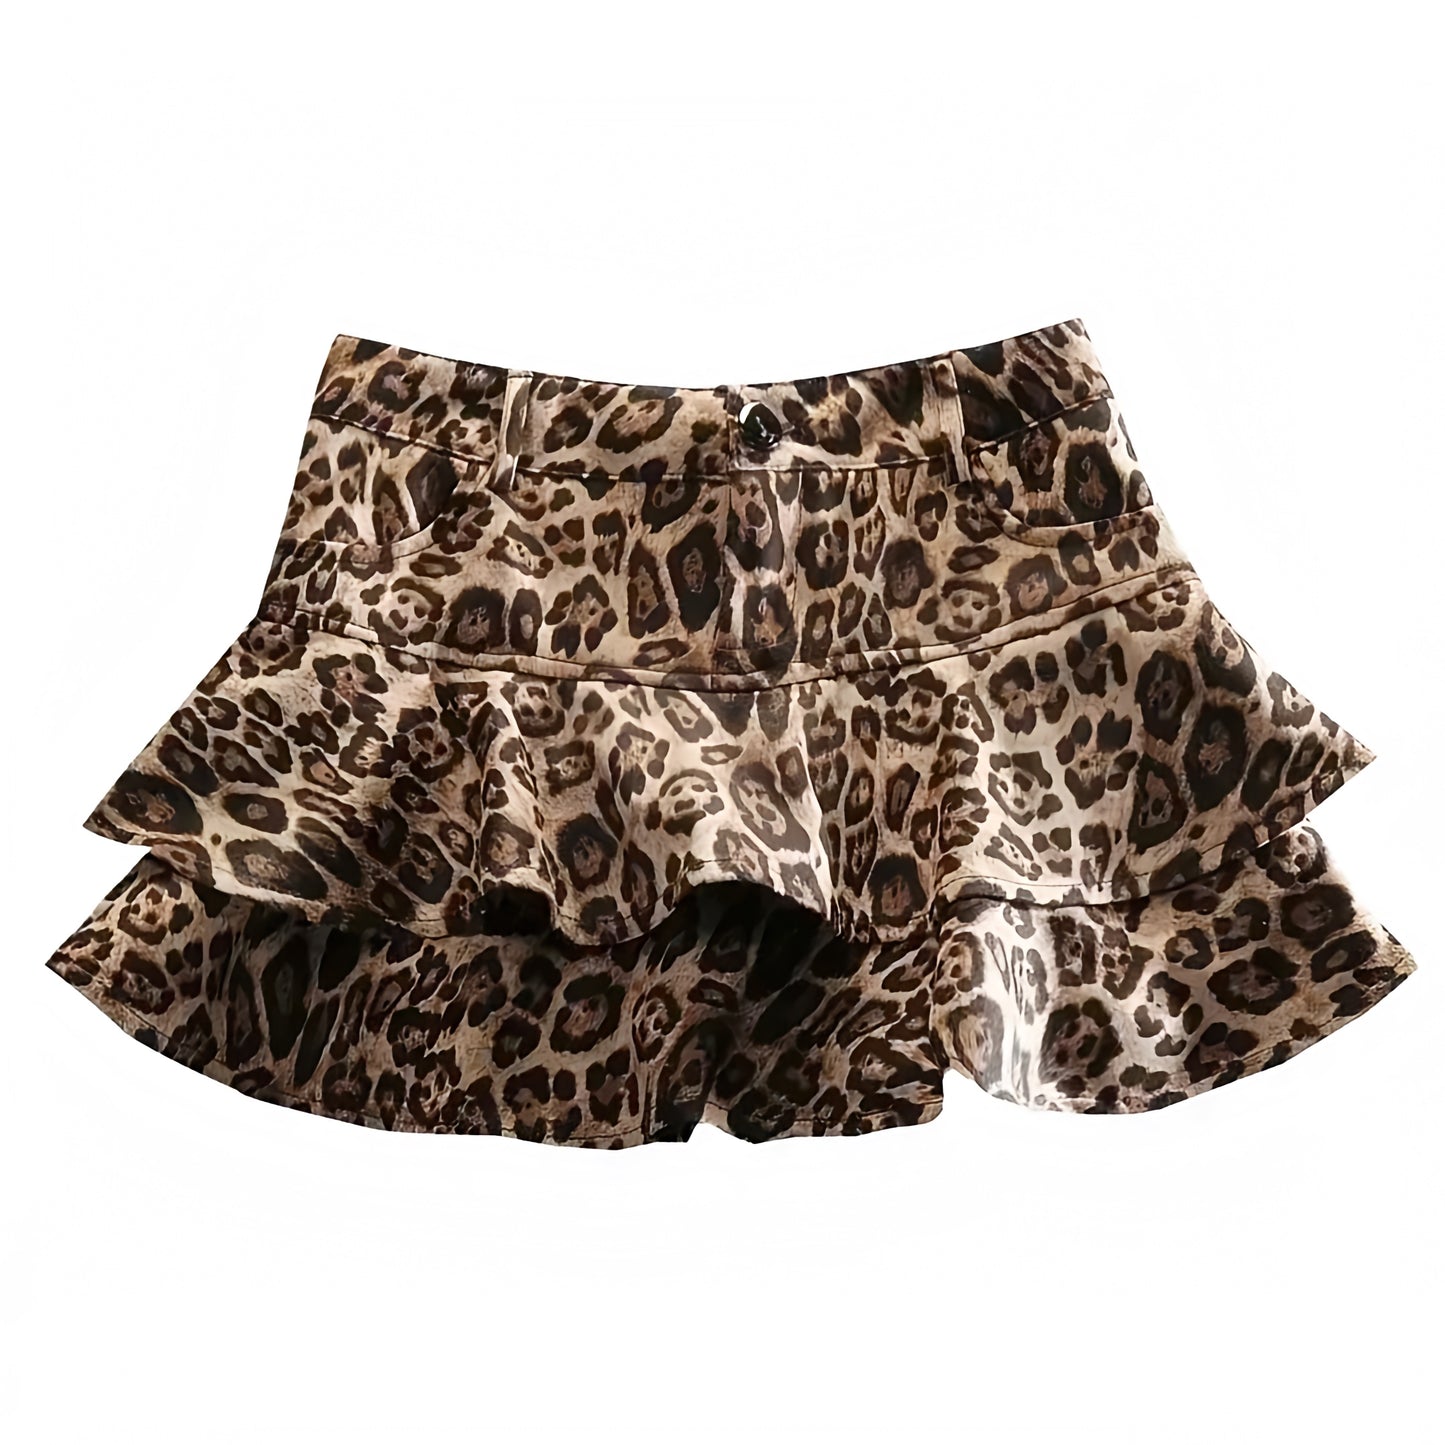 leopard-cheetah-animal-print-patterned-brown-black-layered-ruffle-low-rise-waist-denim-jean-mini-short-skirt-skort-with-pockets-women-ladies-chic-trendy-spring-2024-summer-casual-elegant-classy-y2k-party-club-wear-sexy-date-night-out-exotic-stockholm-style-preppy-zara-revolve-white-fox-jaded-london-princess-polly-edikted